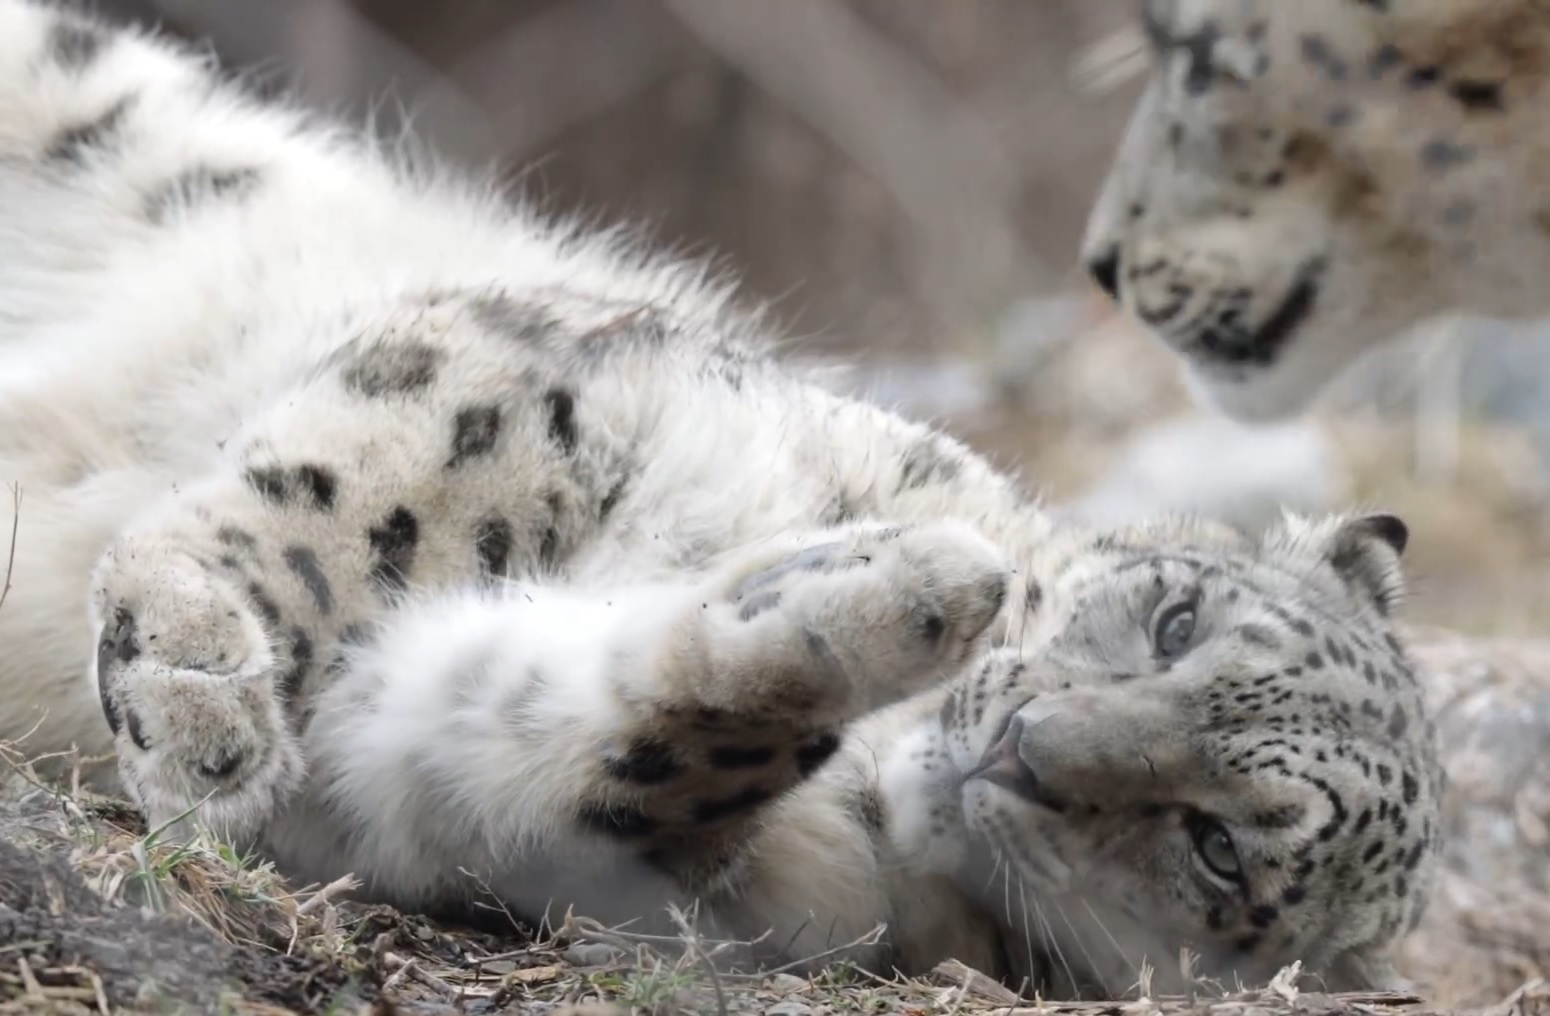 Meet the ‘snowballs’: Snow leopard at Toronto Zoo gives birth to 2 cubs